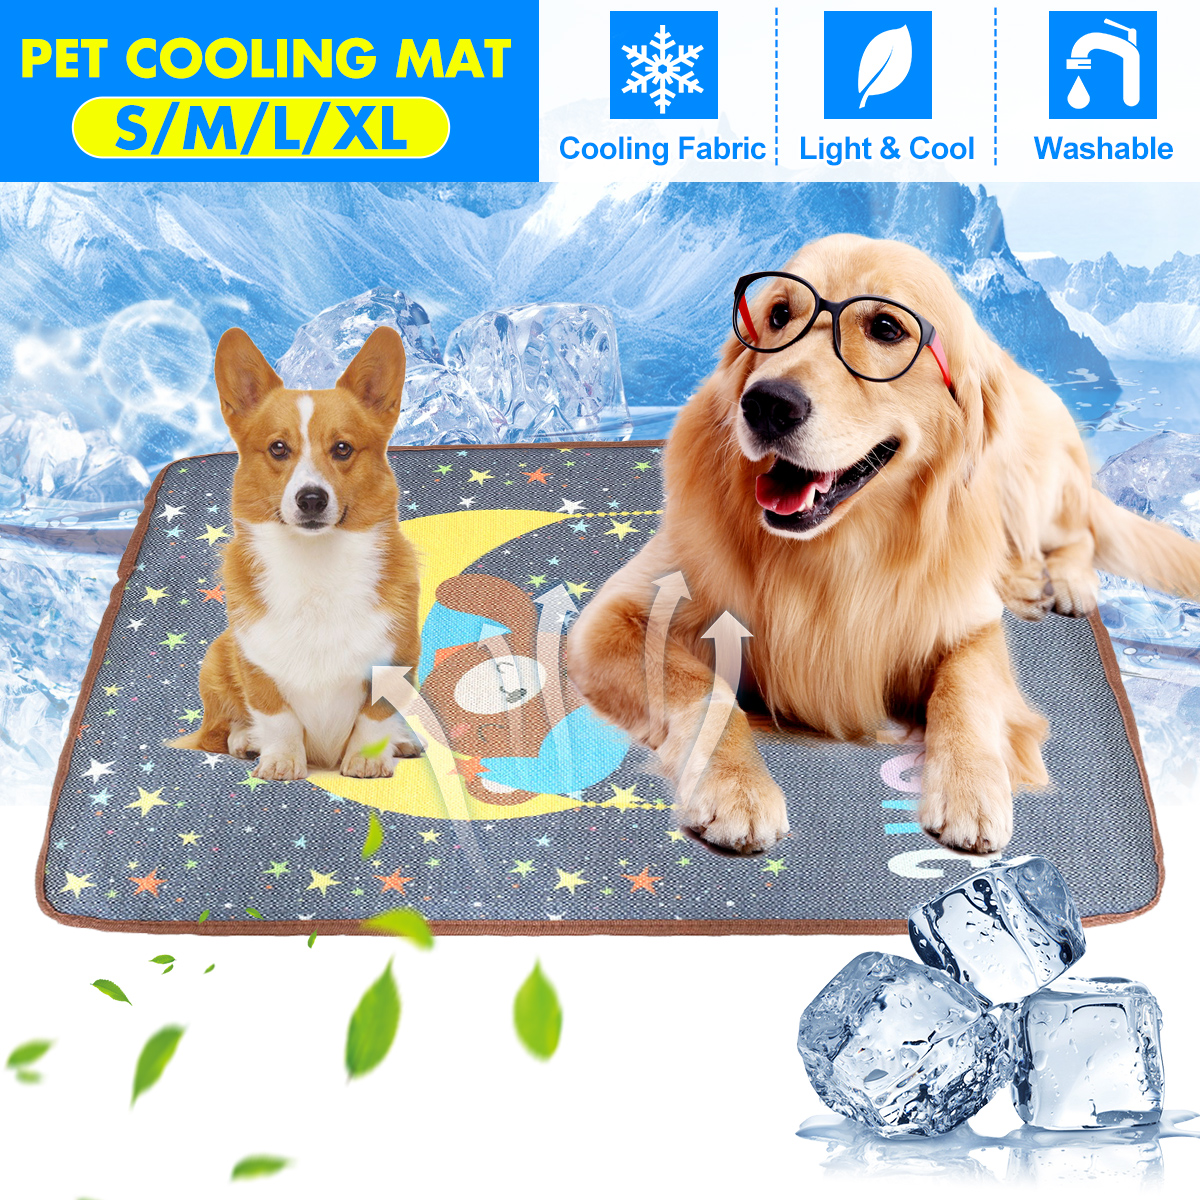 SMLXL-Ice-Silk-Summer-Cooling-Pet-Dog-Cat-Puppy-Cushion-Mat-Pad-Home-1550150-3